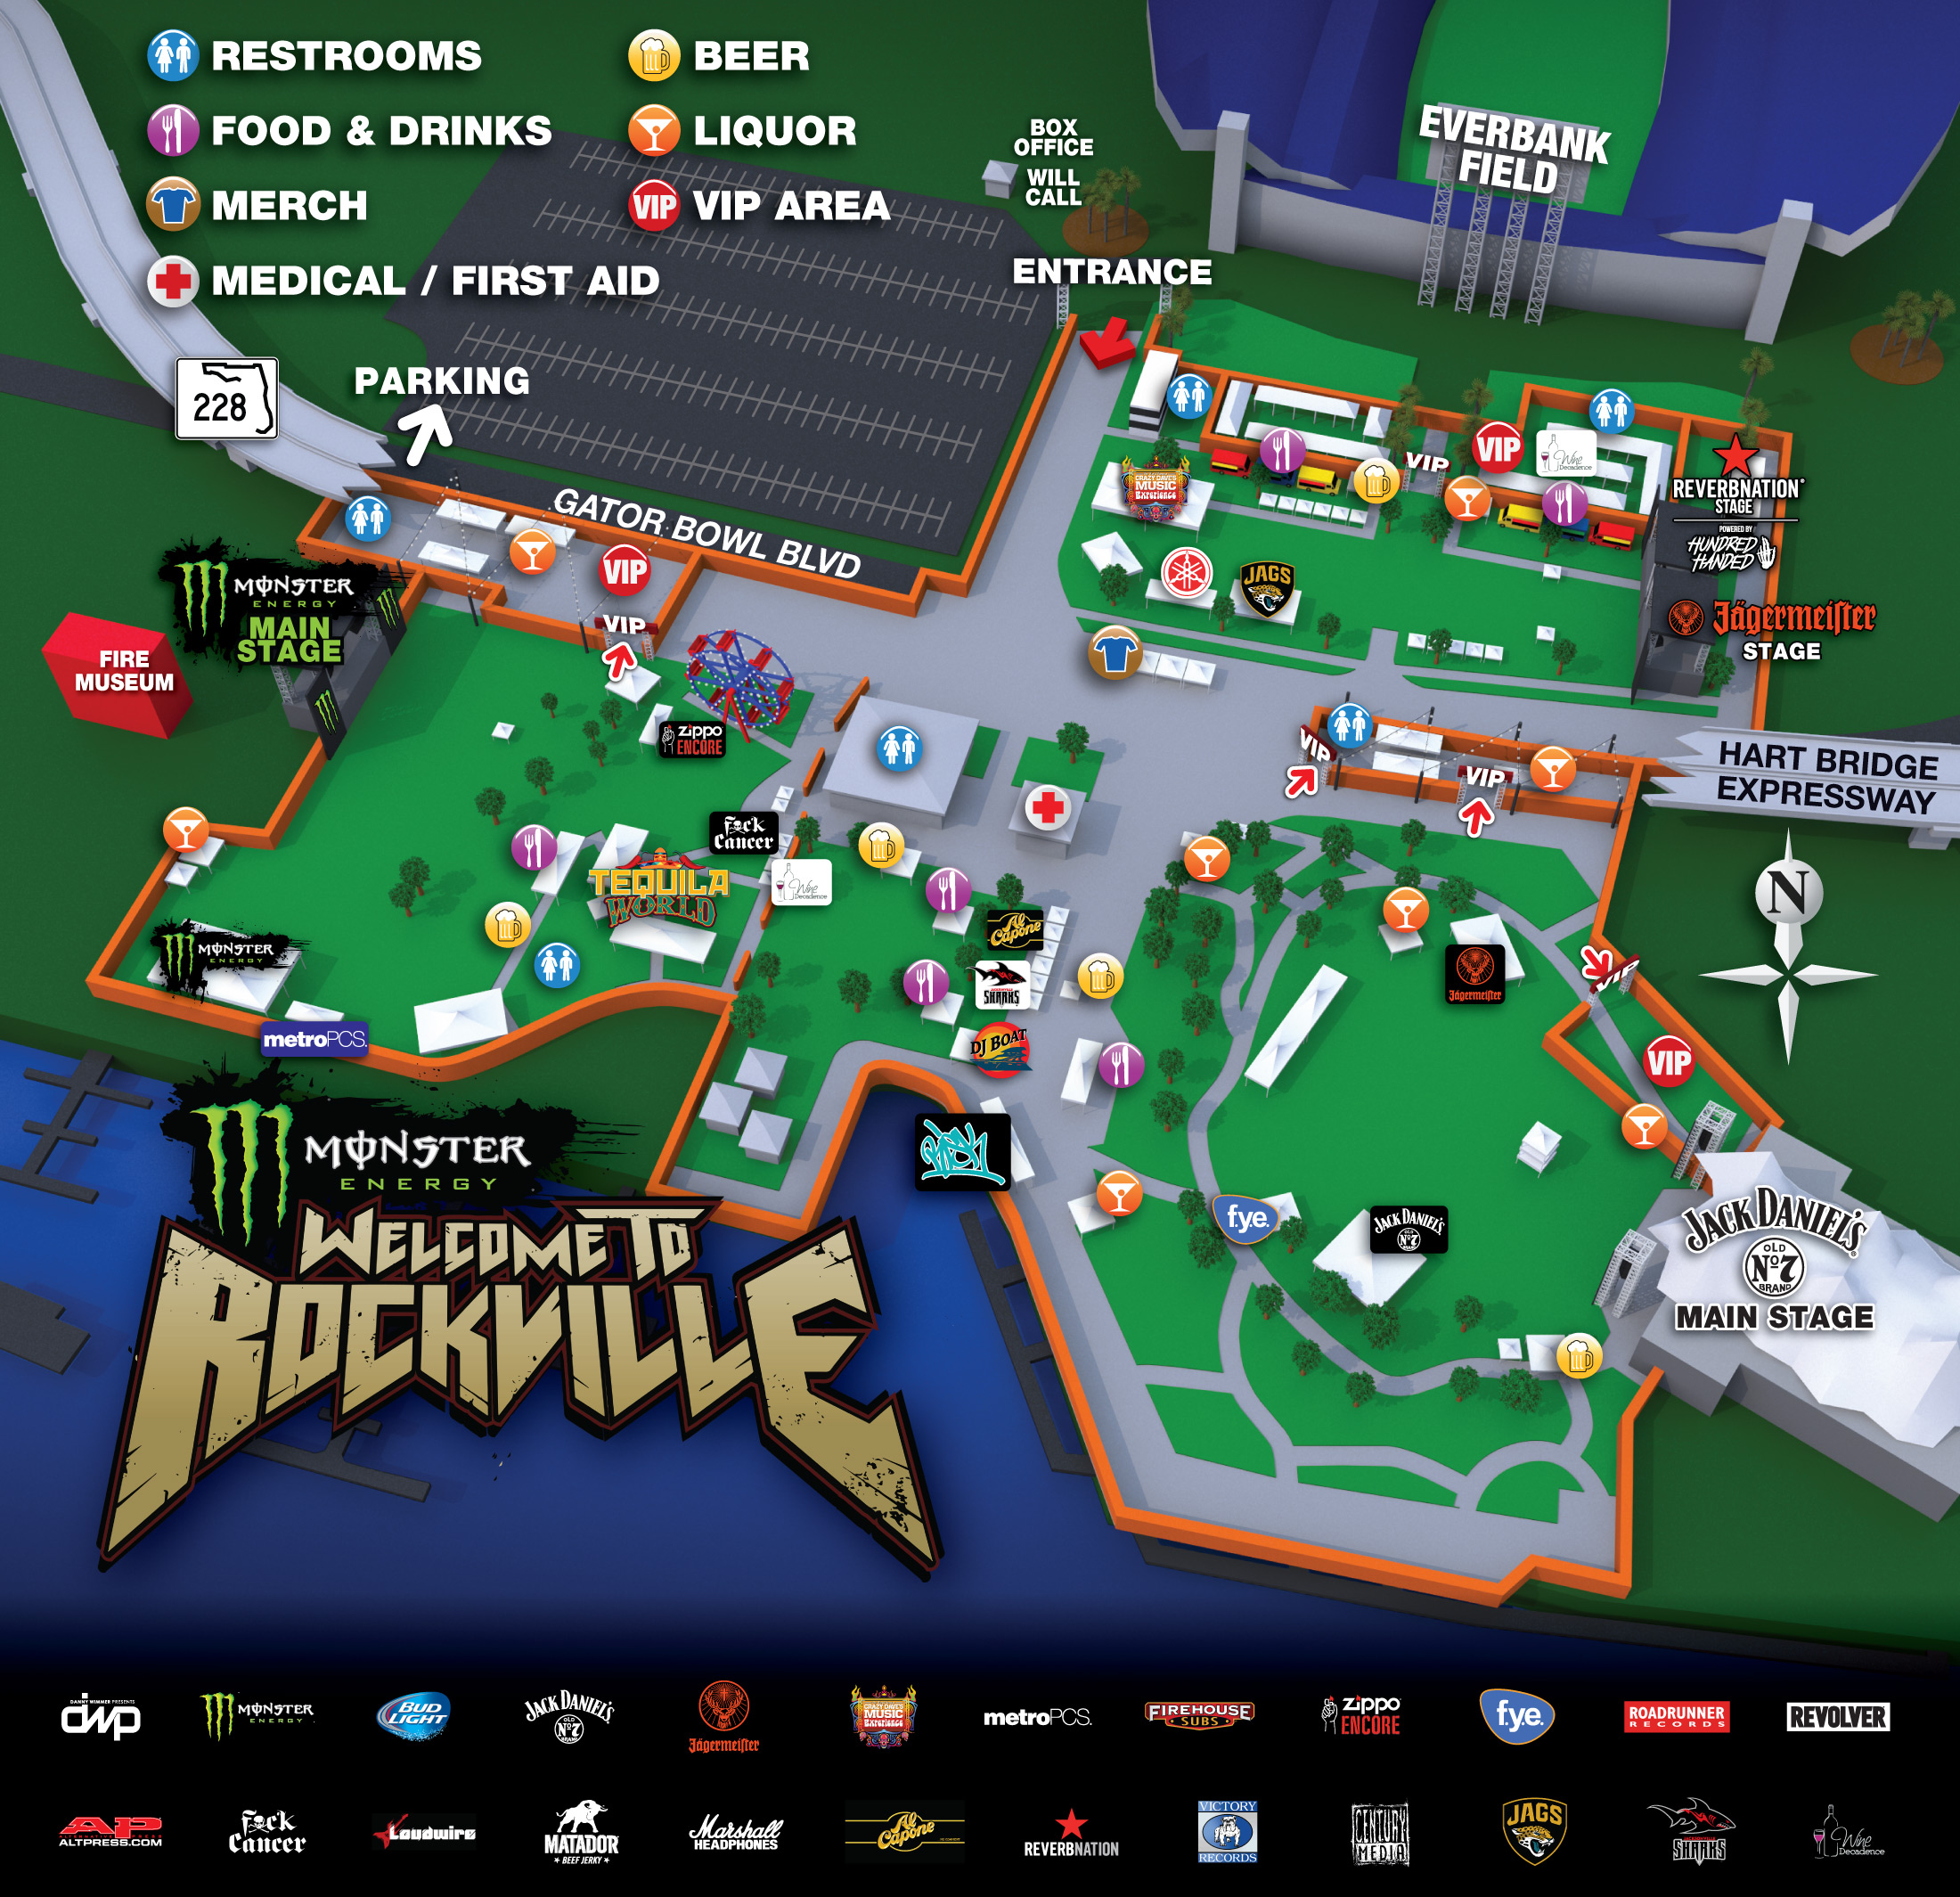 Monster Energy To Rockville festival site expanded due to